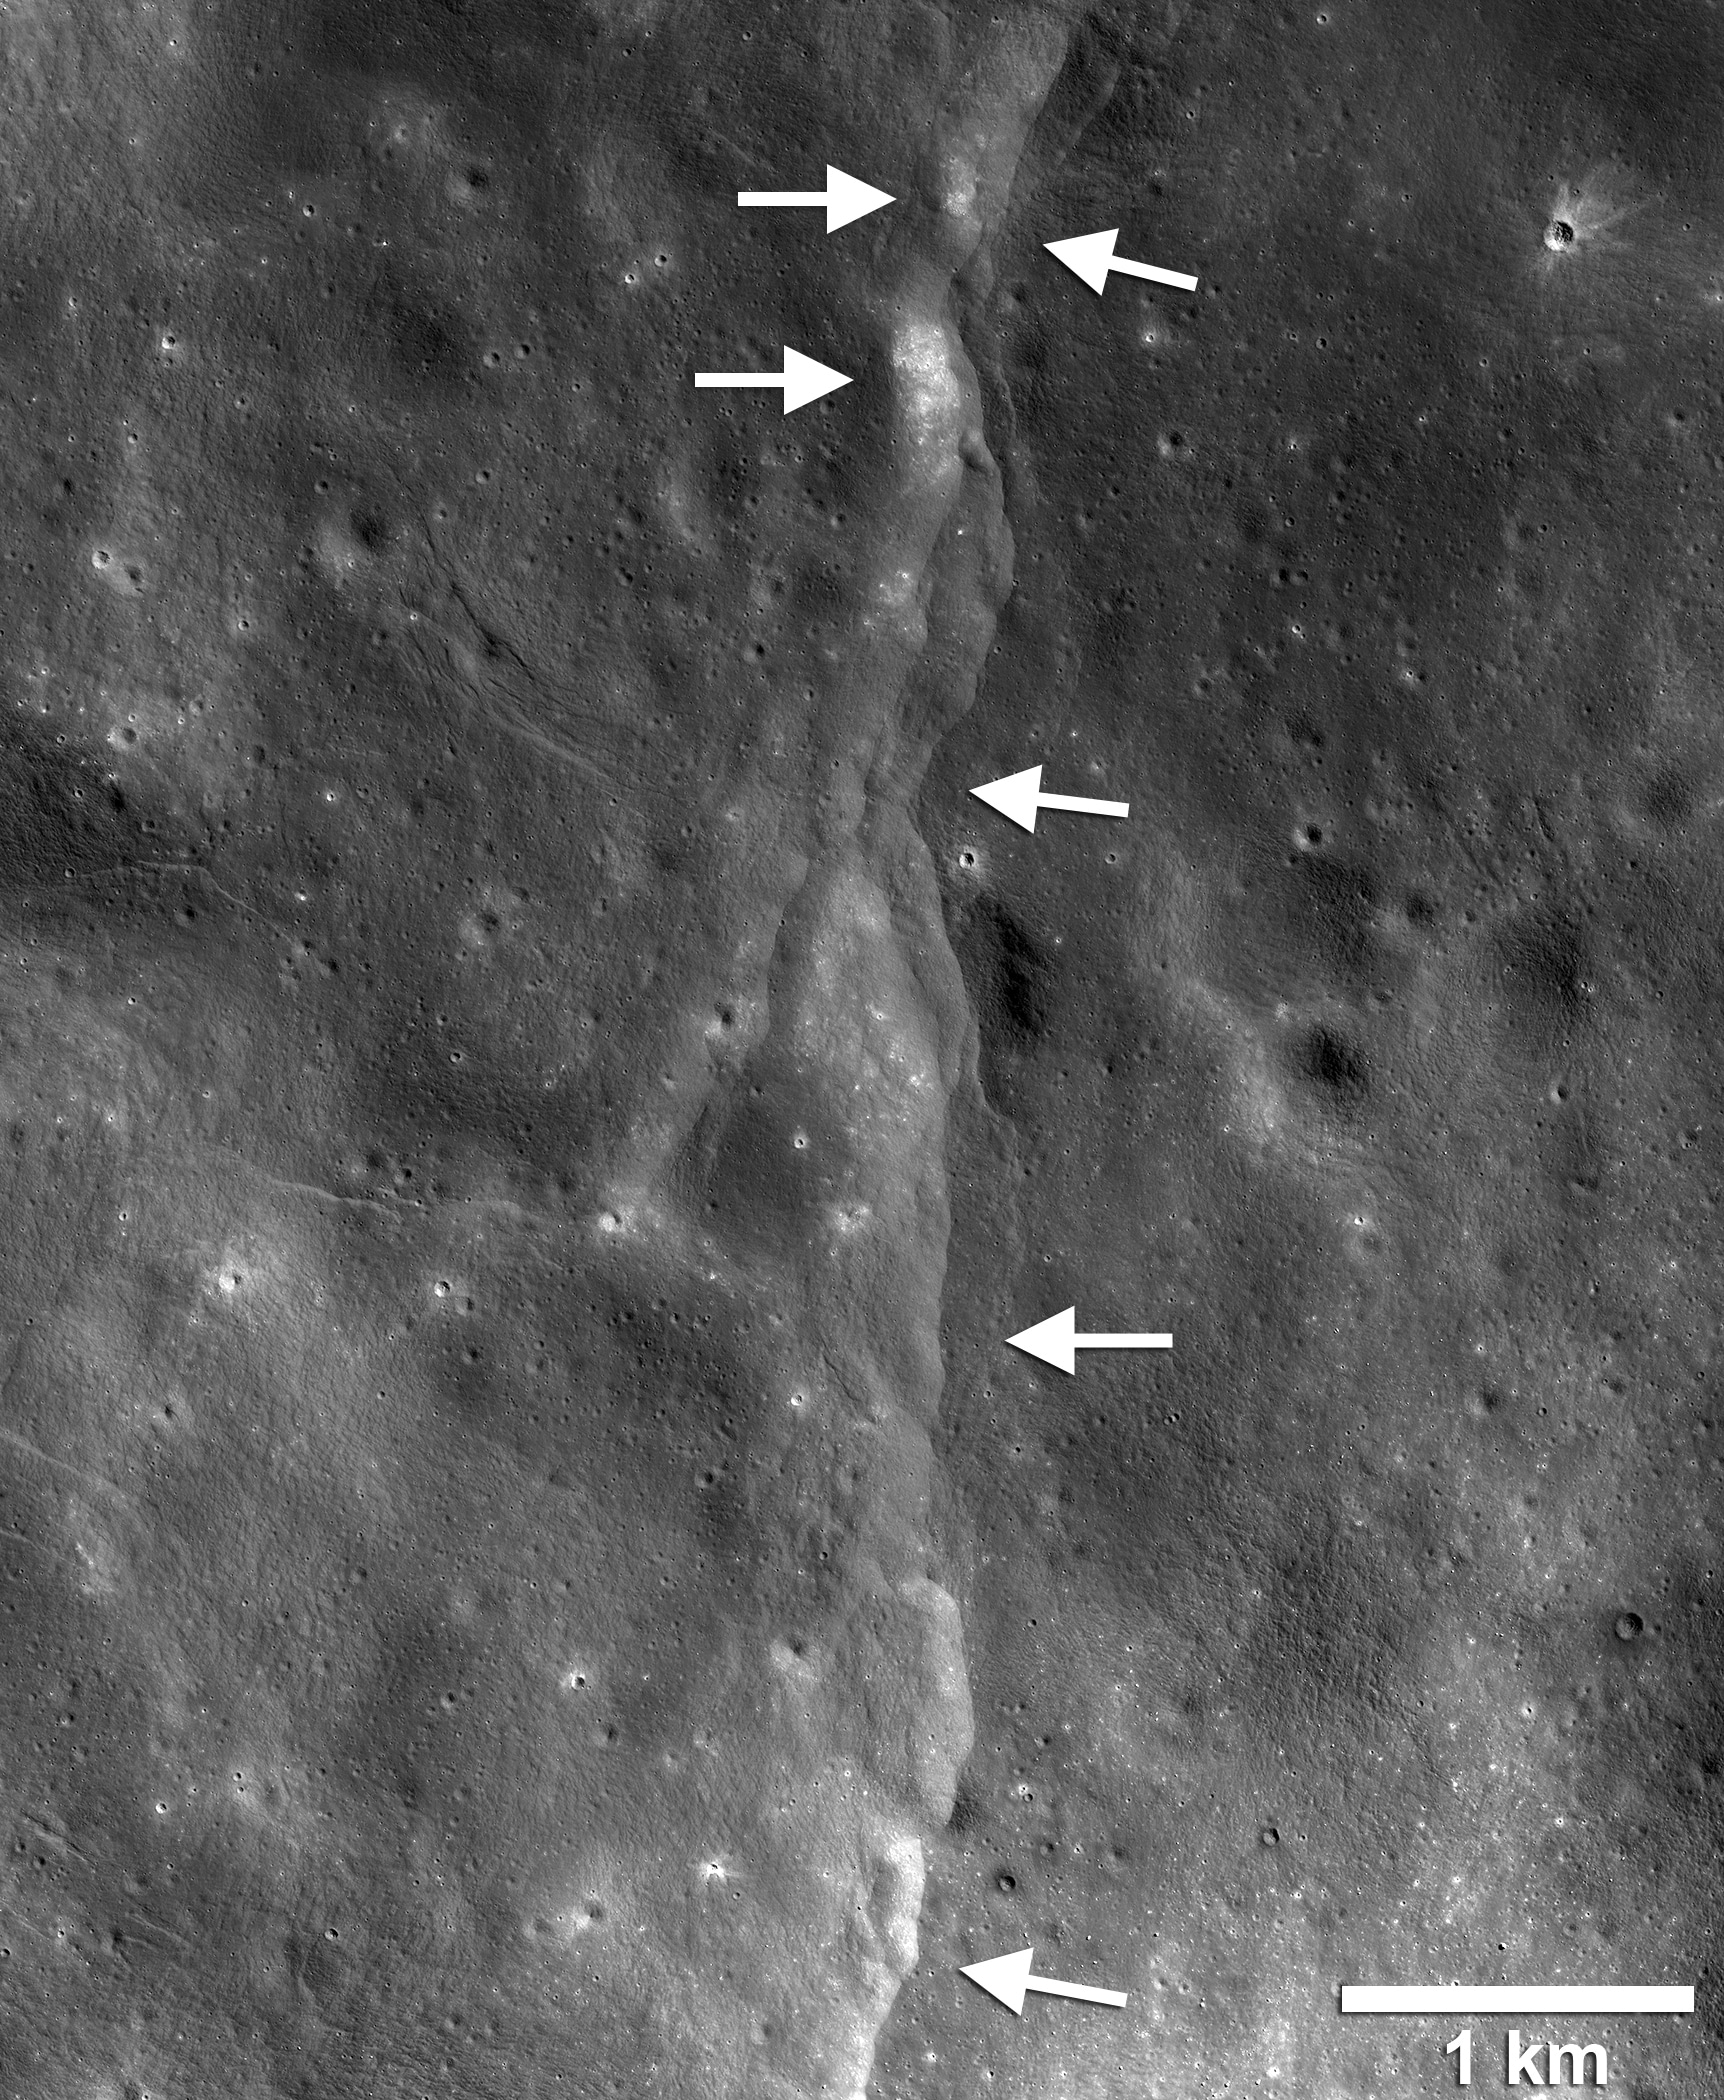 This prominent lunar lobate thrust fault scarp is one of thousands discovered in Lunar Reconnaissance Orbiter Camera (LROC) images. The fault scarp or cliff is like a stair-step in the lunar landscape (left-pointing white arrows) formed when the near-surface crust is pushed together, breaks, and is thrust upward along a fault as the Moon contracts. Boulder fields, patches of relatively high bright soil or regolith, are found on the scarp face and back scarp terrain (high side of the scarp, right-pointing arrows). Image LROC NAC frame M190844037LR. Credits: NASA/GSFC/Arizona State University/Smithsonian